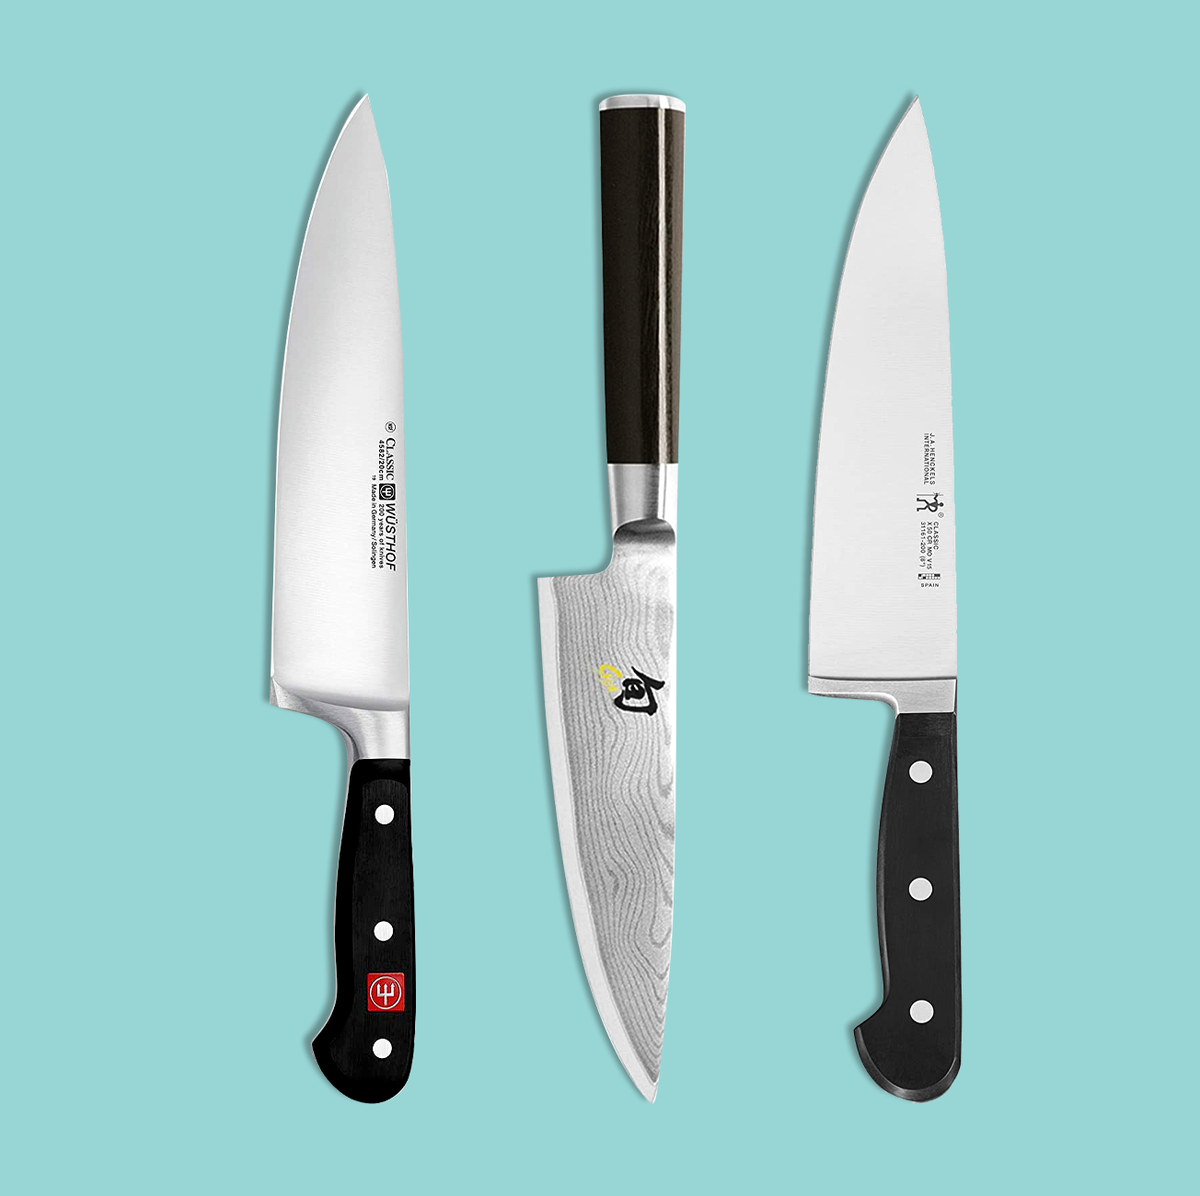 Best Knives - Reviews of Cutlery Sets